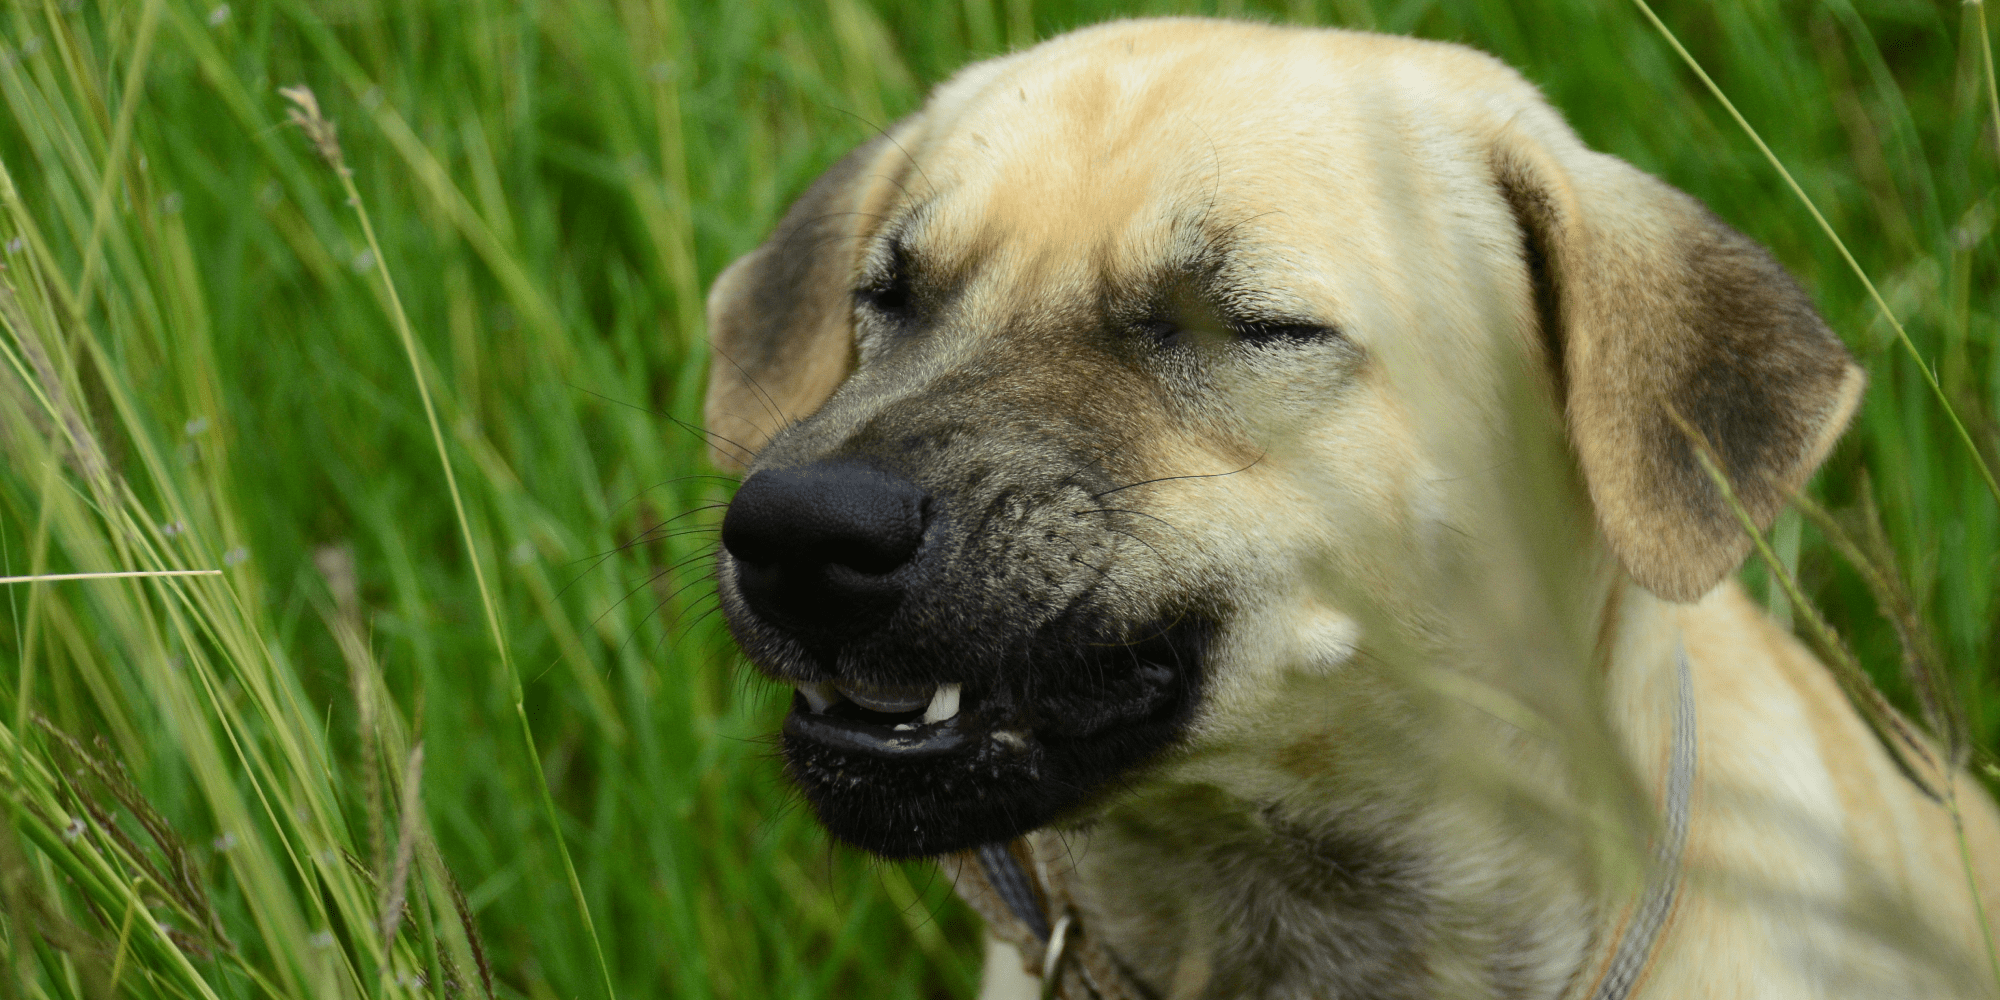 A photo of a dog sneezing